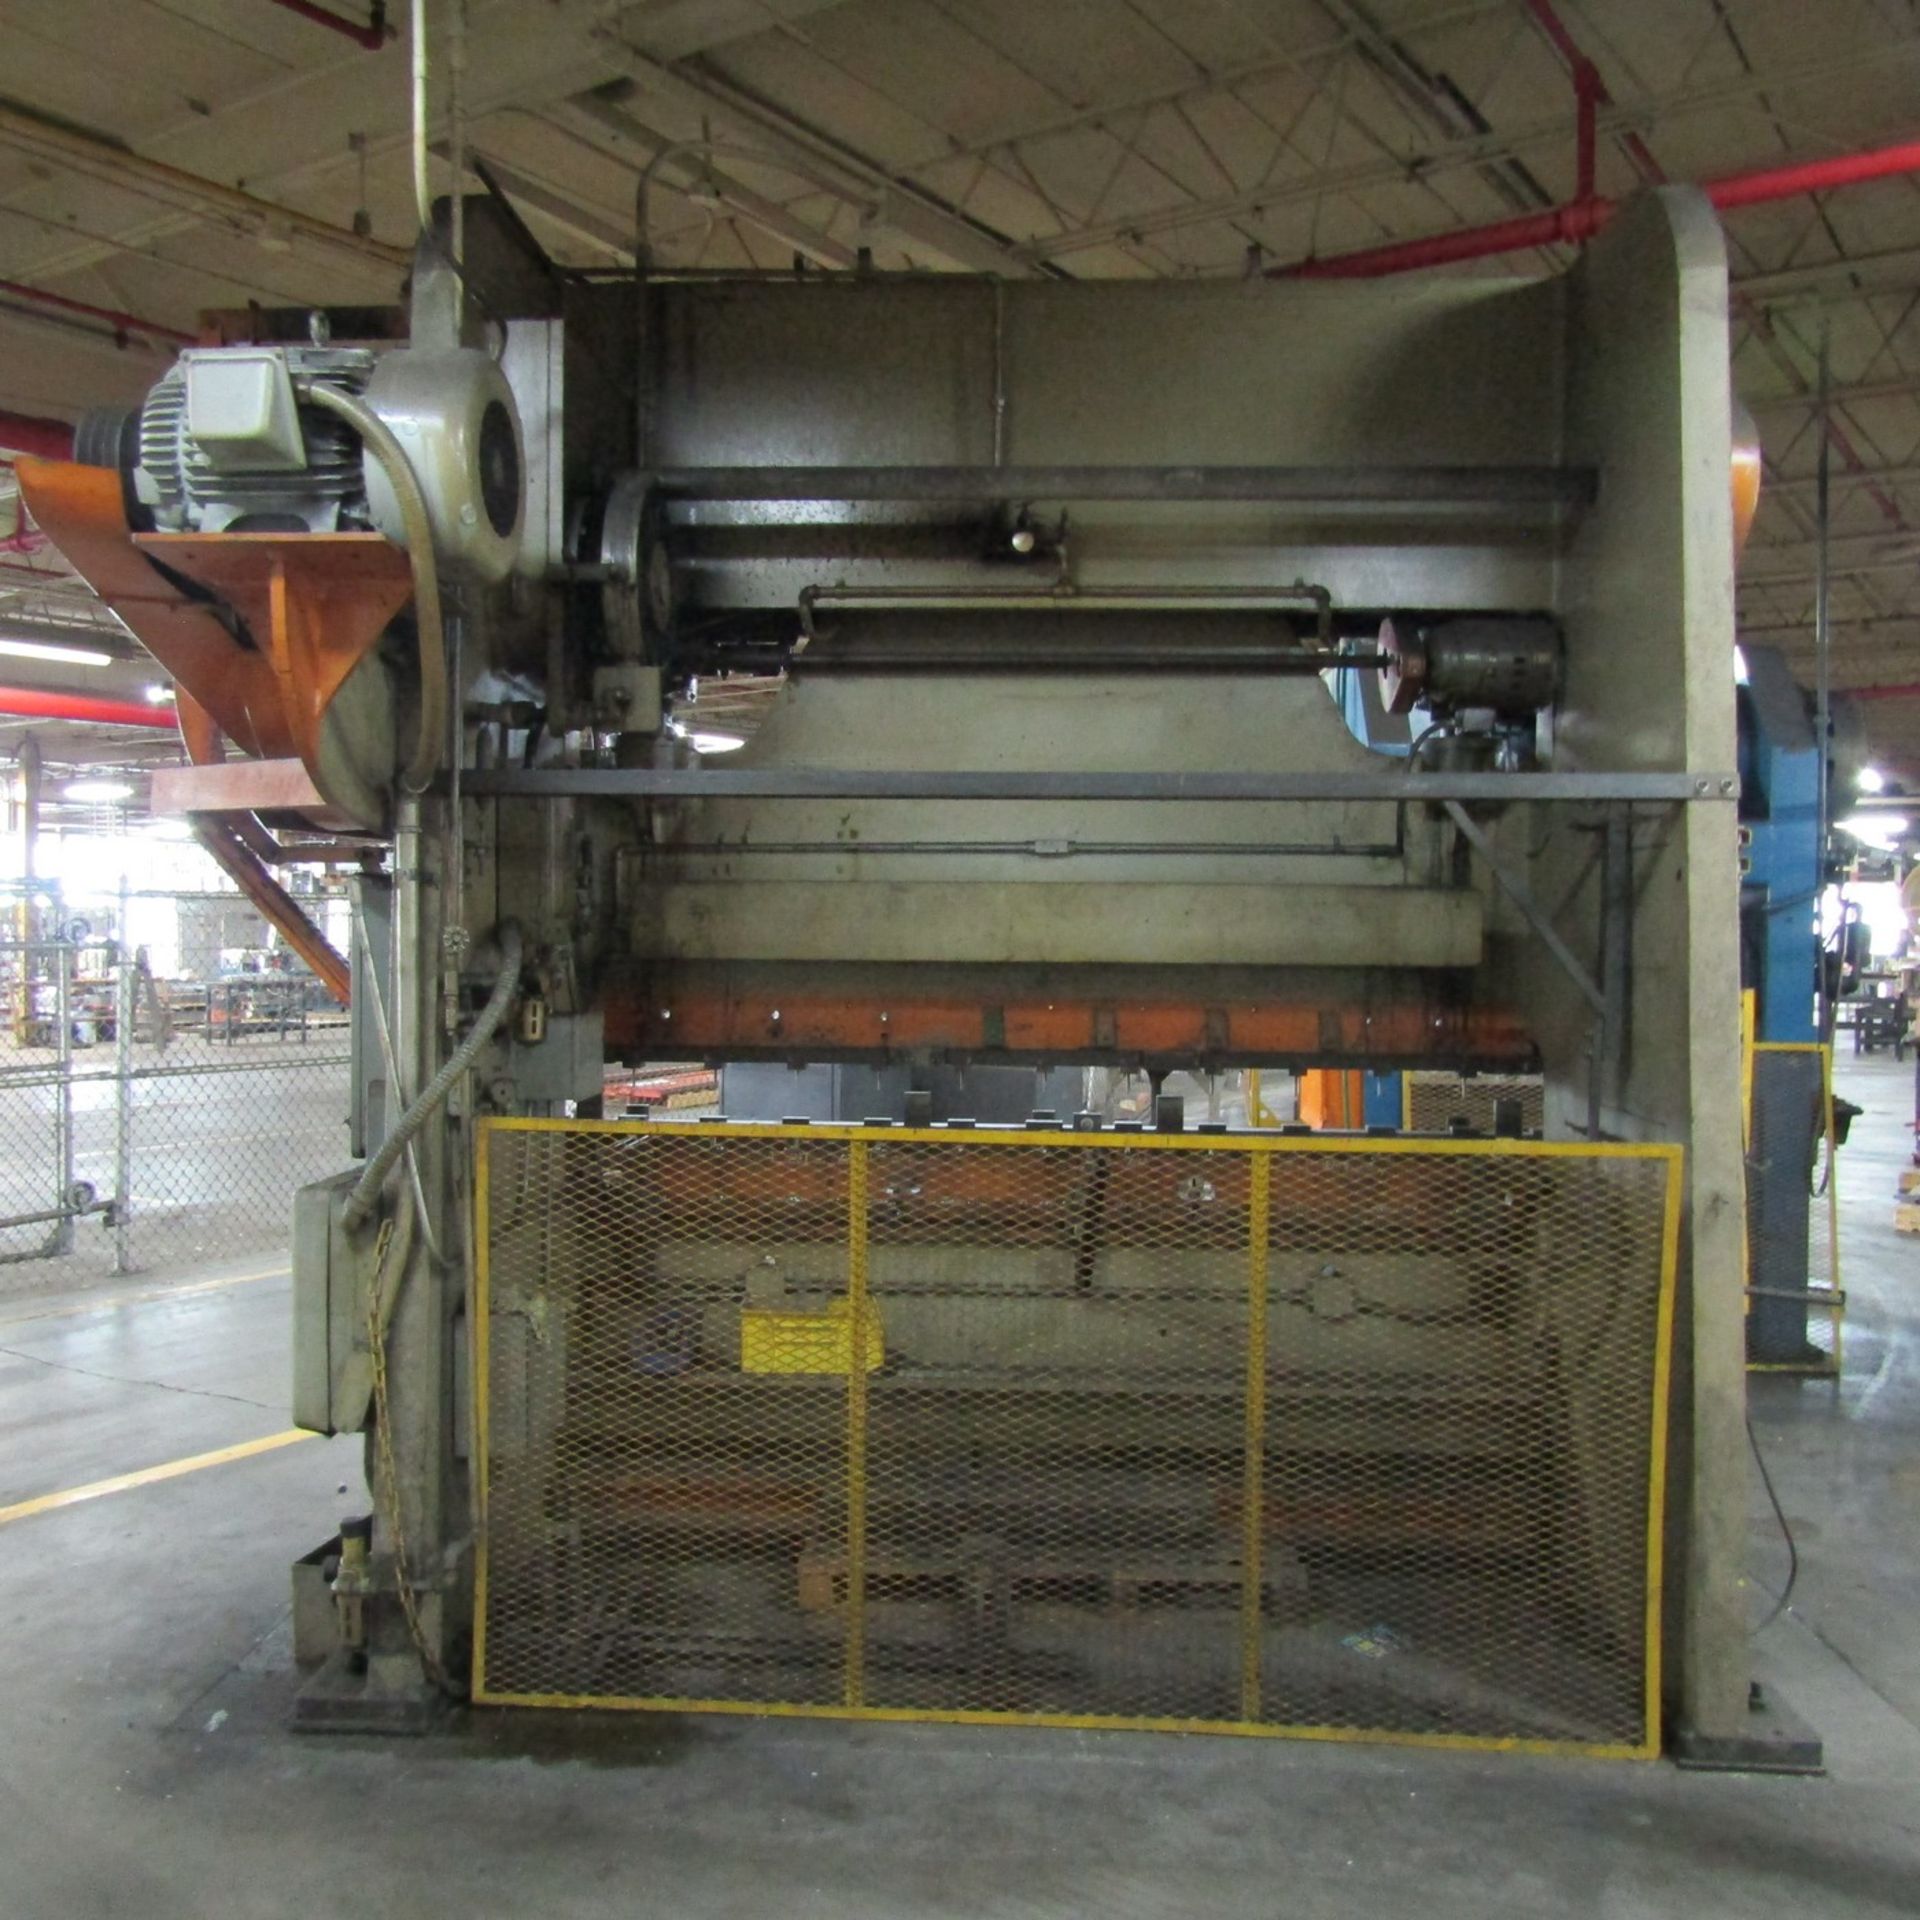 Chicago Dreis & Krump 250-Ton Cap. Model 608-D Press Brake, S/N: P-8645; with 126 in. Overall Bed, - Image 3 of 6